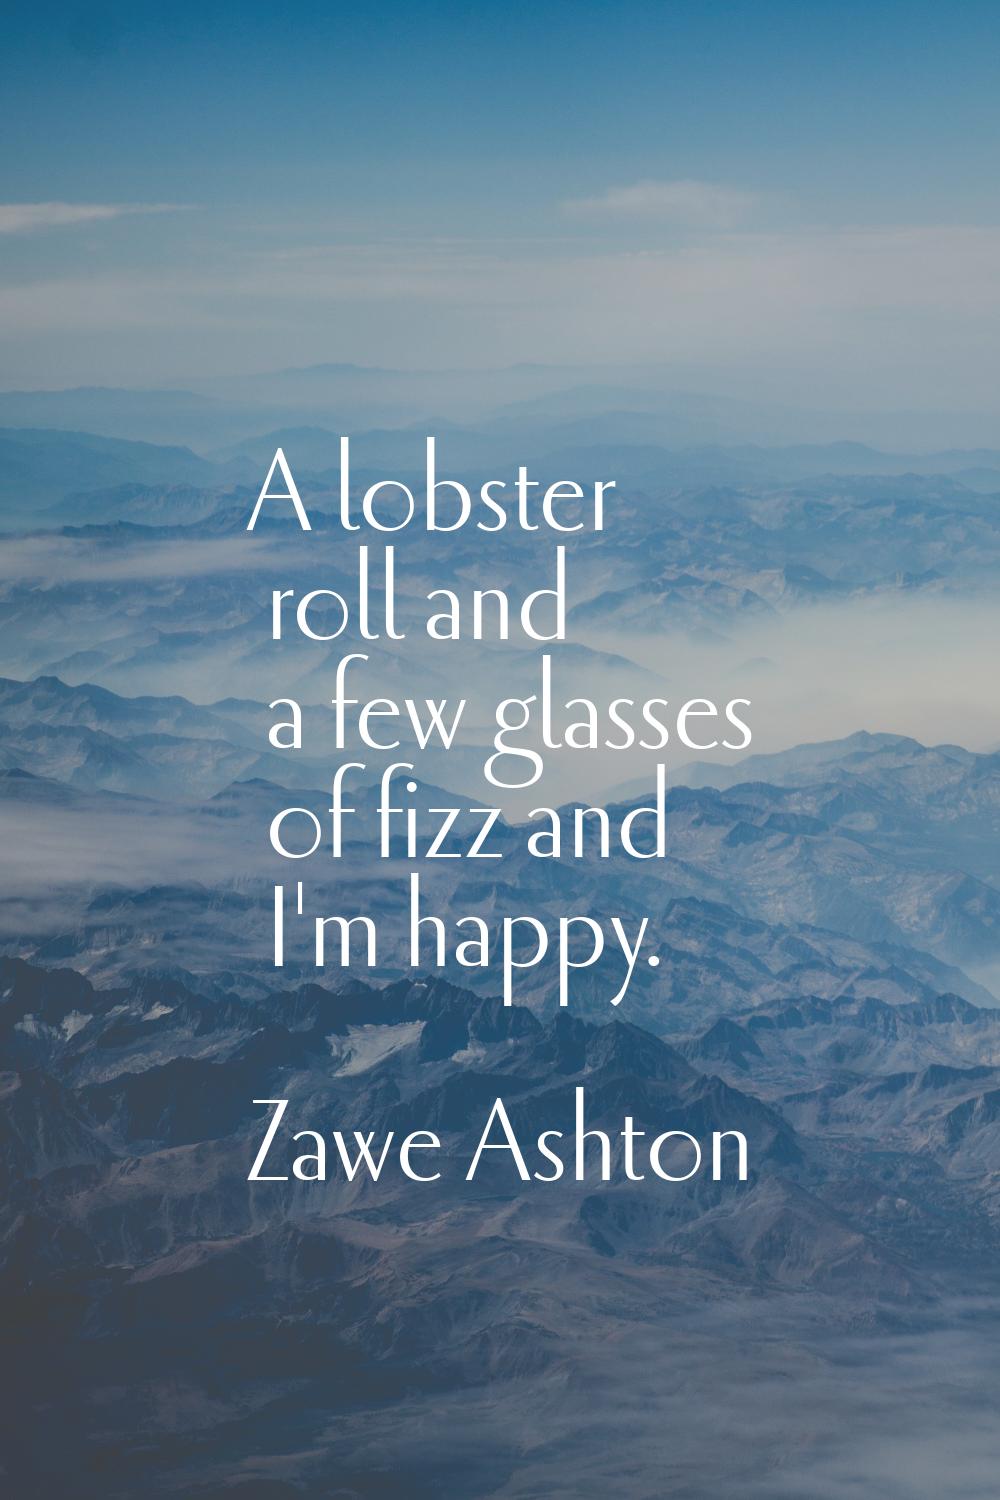 A lobster roll and a few glasses of fizz and I'm happy.